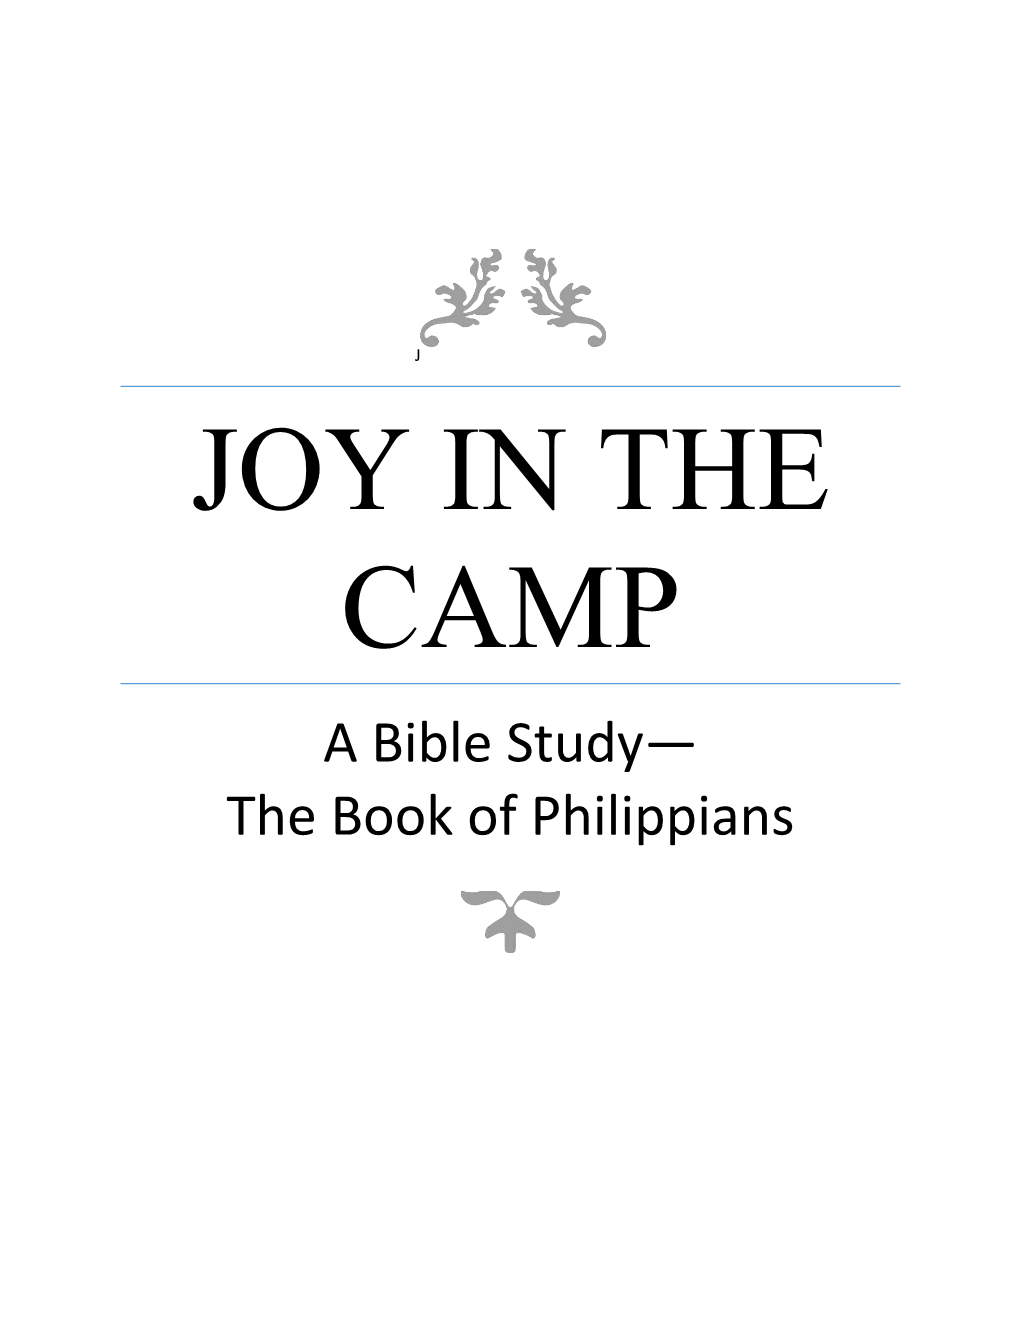 Joy in the Camp